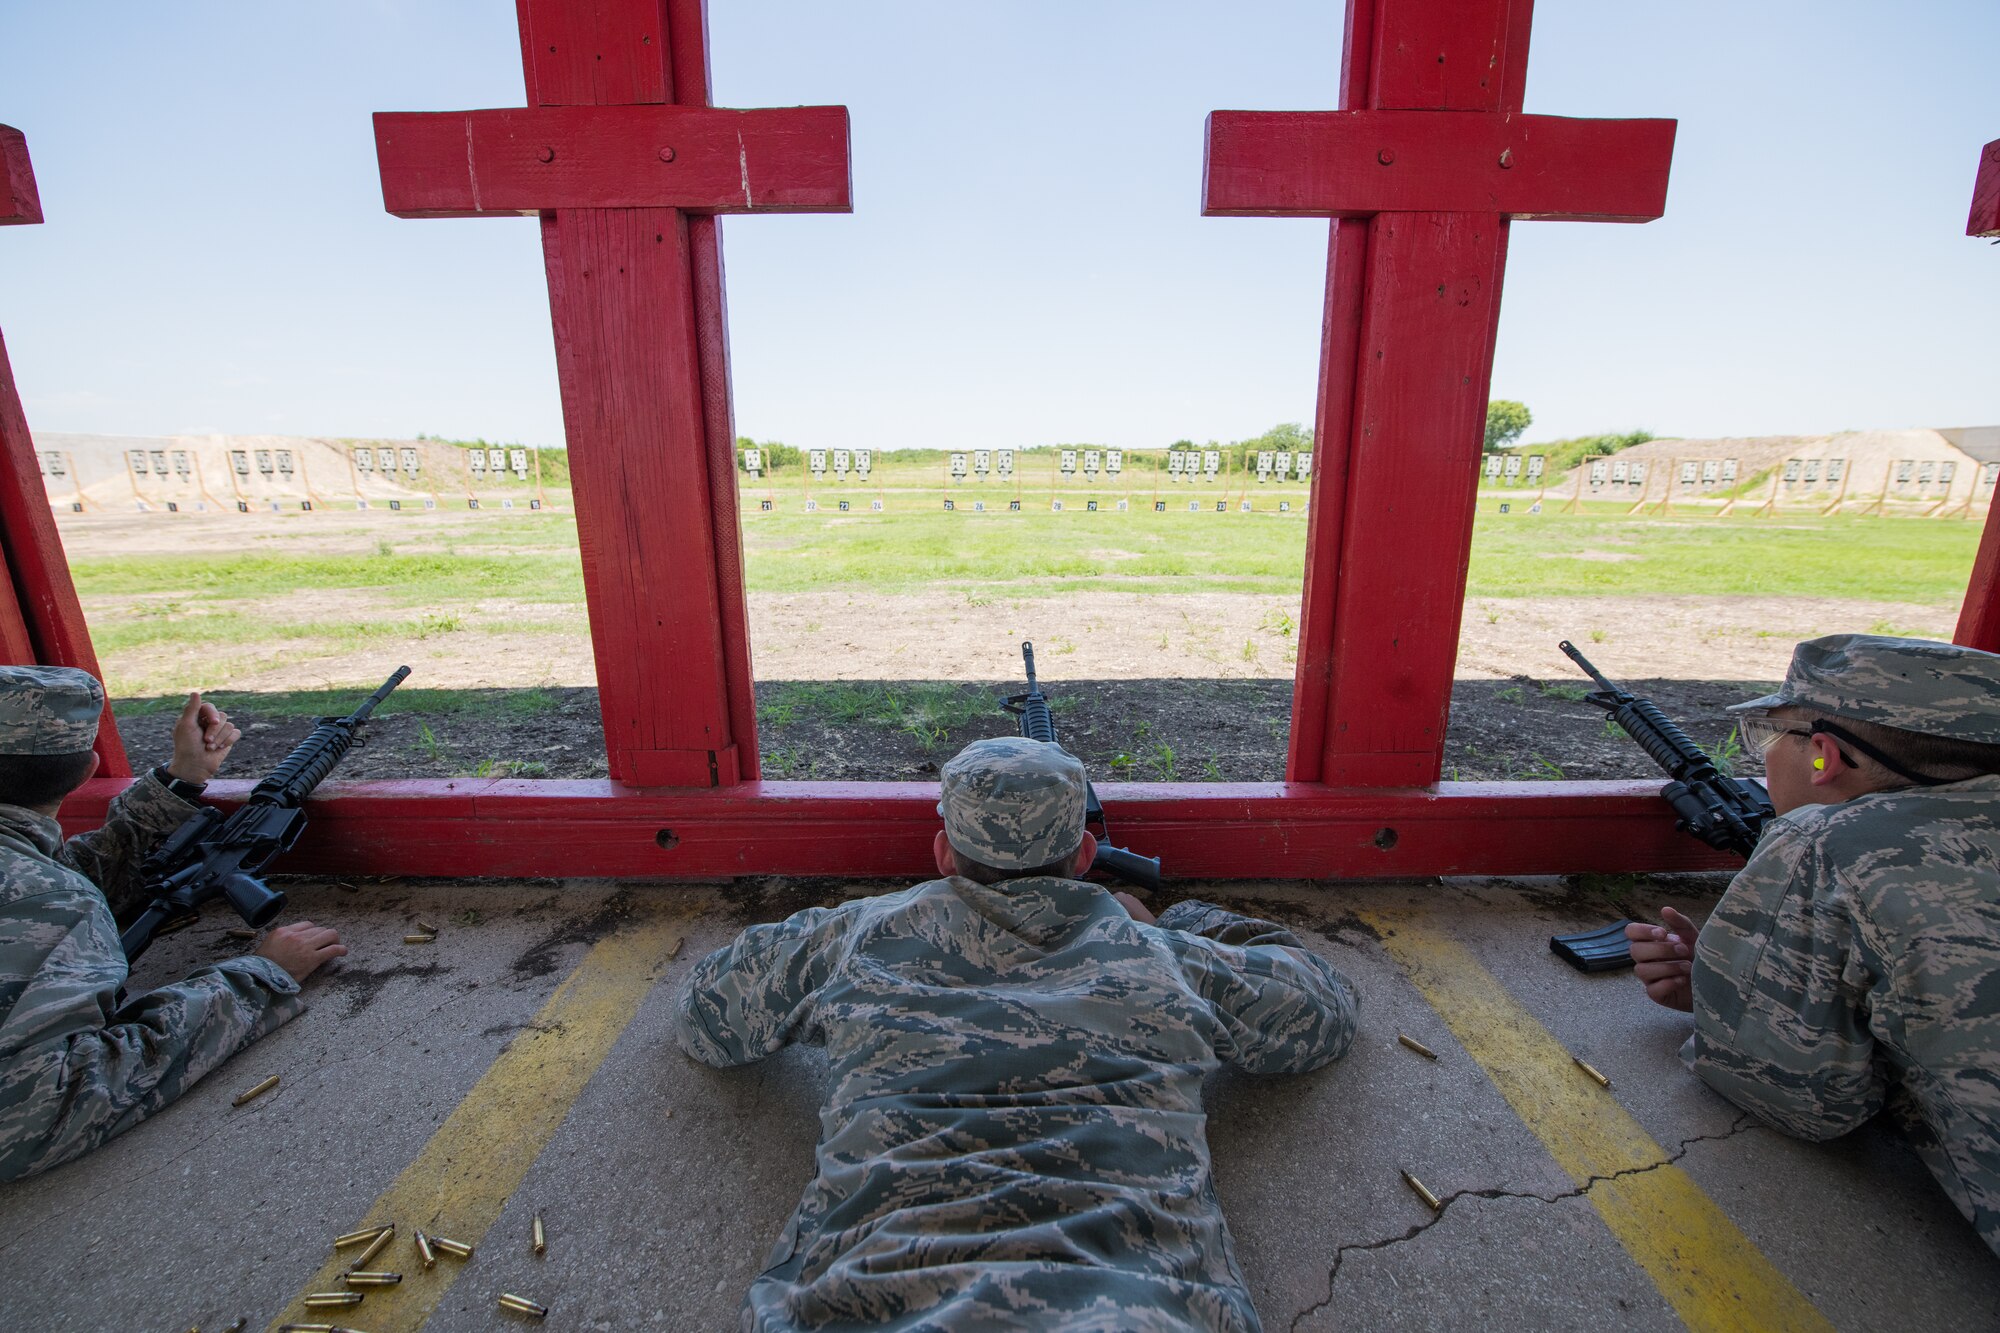 U.S. Air Force basic military training trainees prepare to engage targets during a weapons familiarization course, July 8, 2019, at Joint Base San Antonio-Medina Annex. BMT trainees were the first to experience M-4 Carbine Weapons Familiarization Course at the new facility, which closed in November 2018, due to improper rainwater drainage. The firing range allows instructors to train 244 BMT trainees daily, four days a week, qualifying more than 40,000 BMT trainees in the M-4 carbine annually. (U.S. Air Force photo by Sarayuth Pinthong)